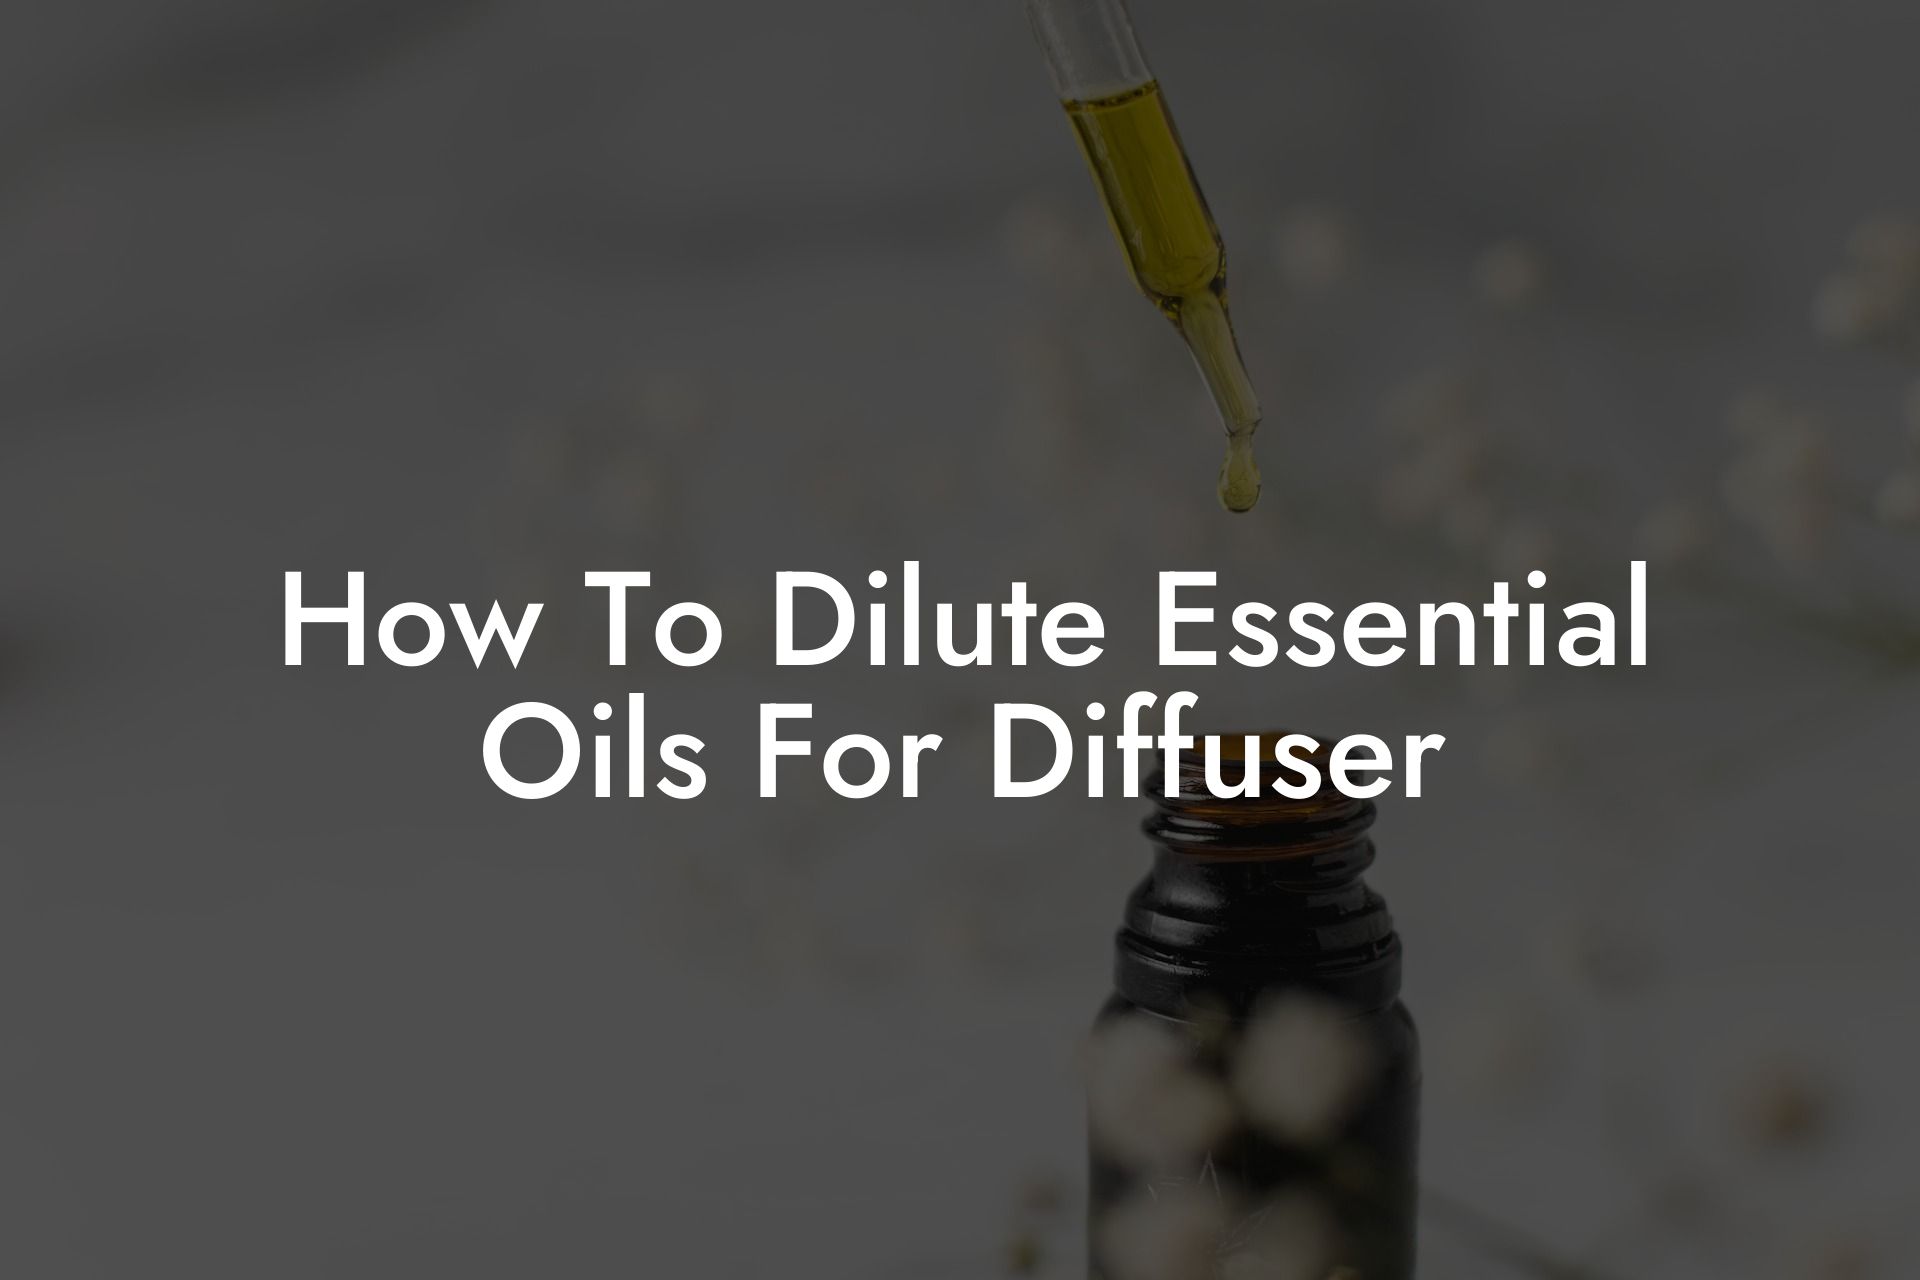 How To Dilute Essential Oils For Diffuser